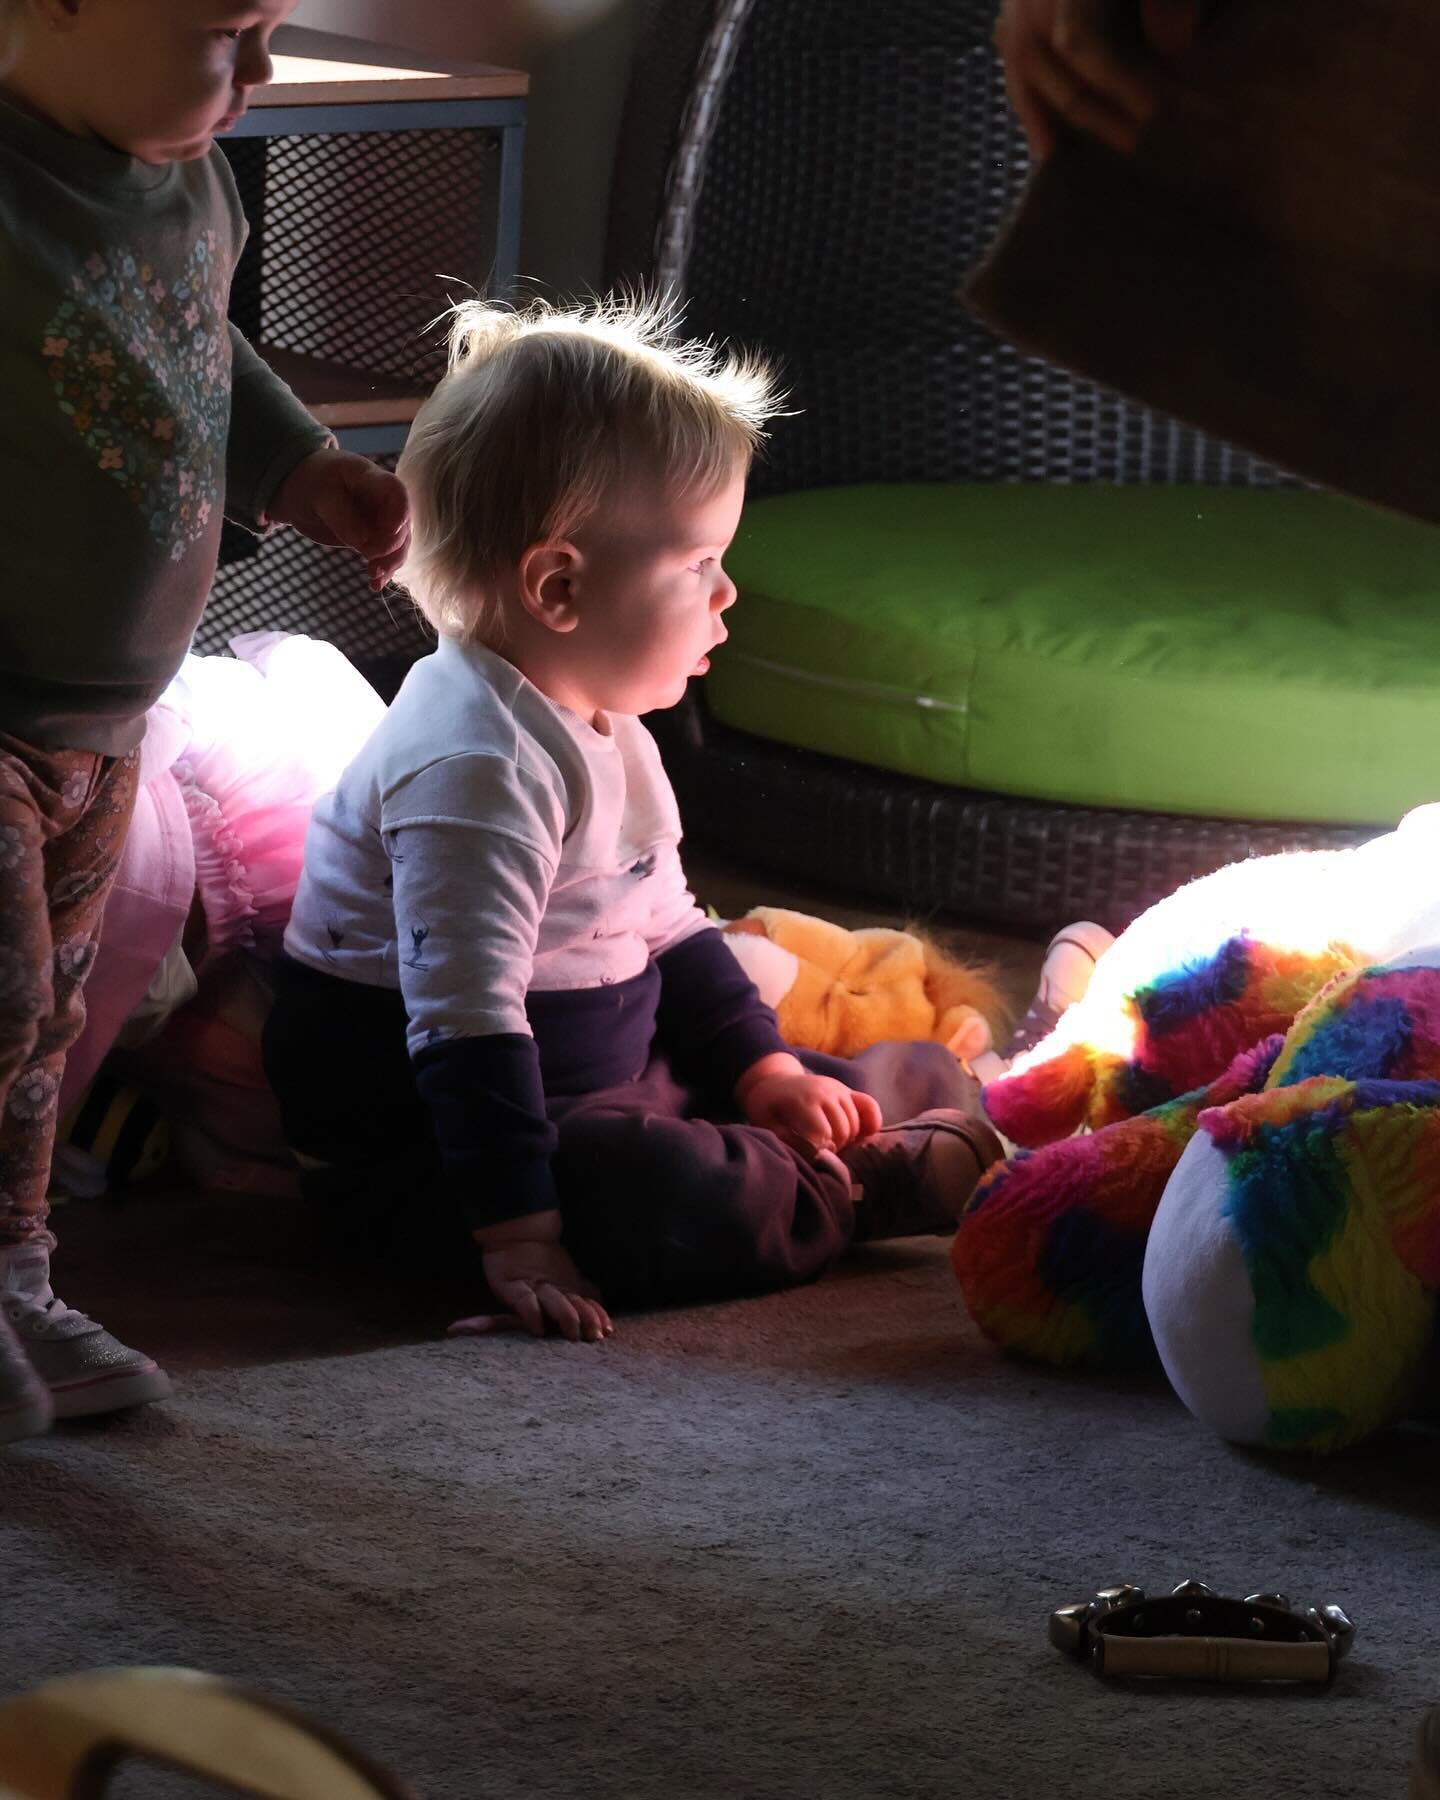 &ldquo;Did you know that at Montessori Room, children are encouraged to explore their interests at their own pace, fostering a love of learning that lasts a lifetime?&rdquo;